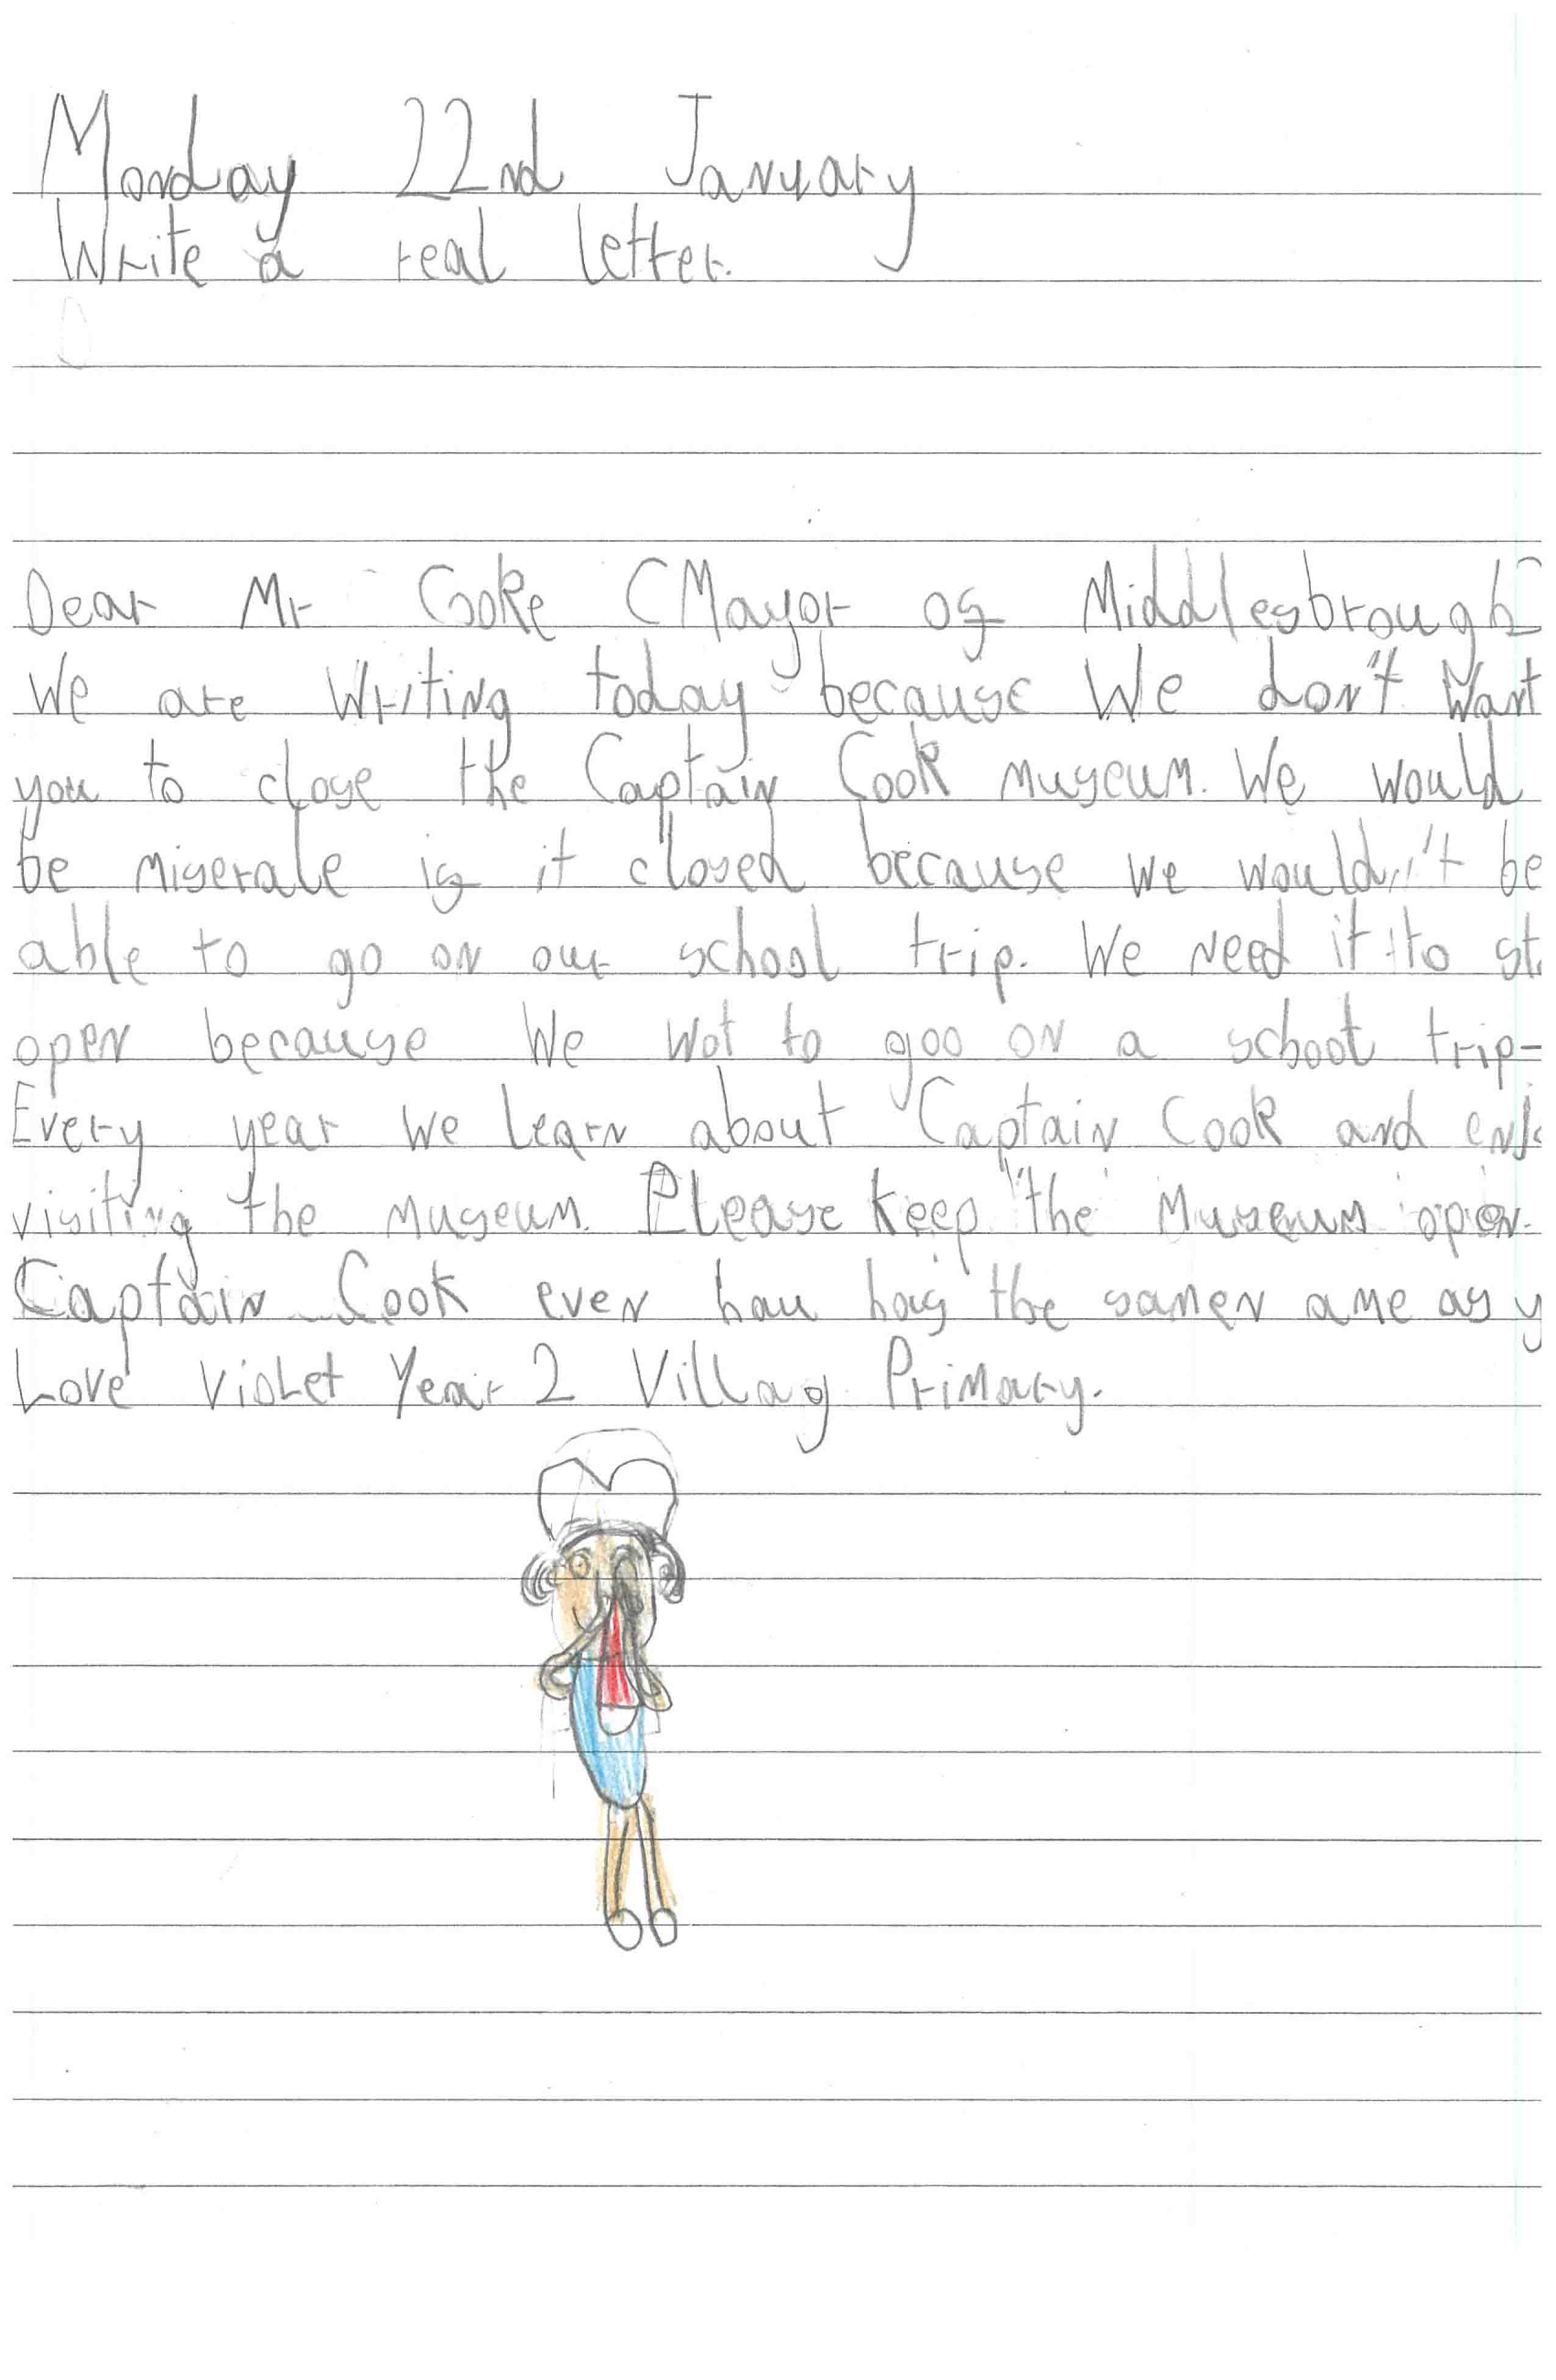 One of the letters sent by children